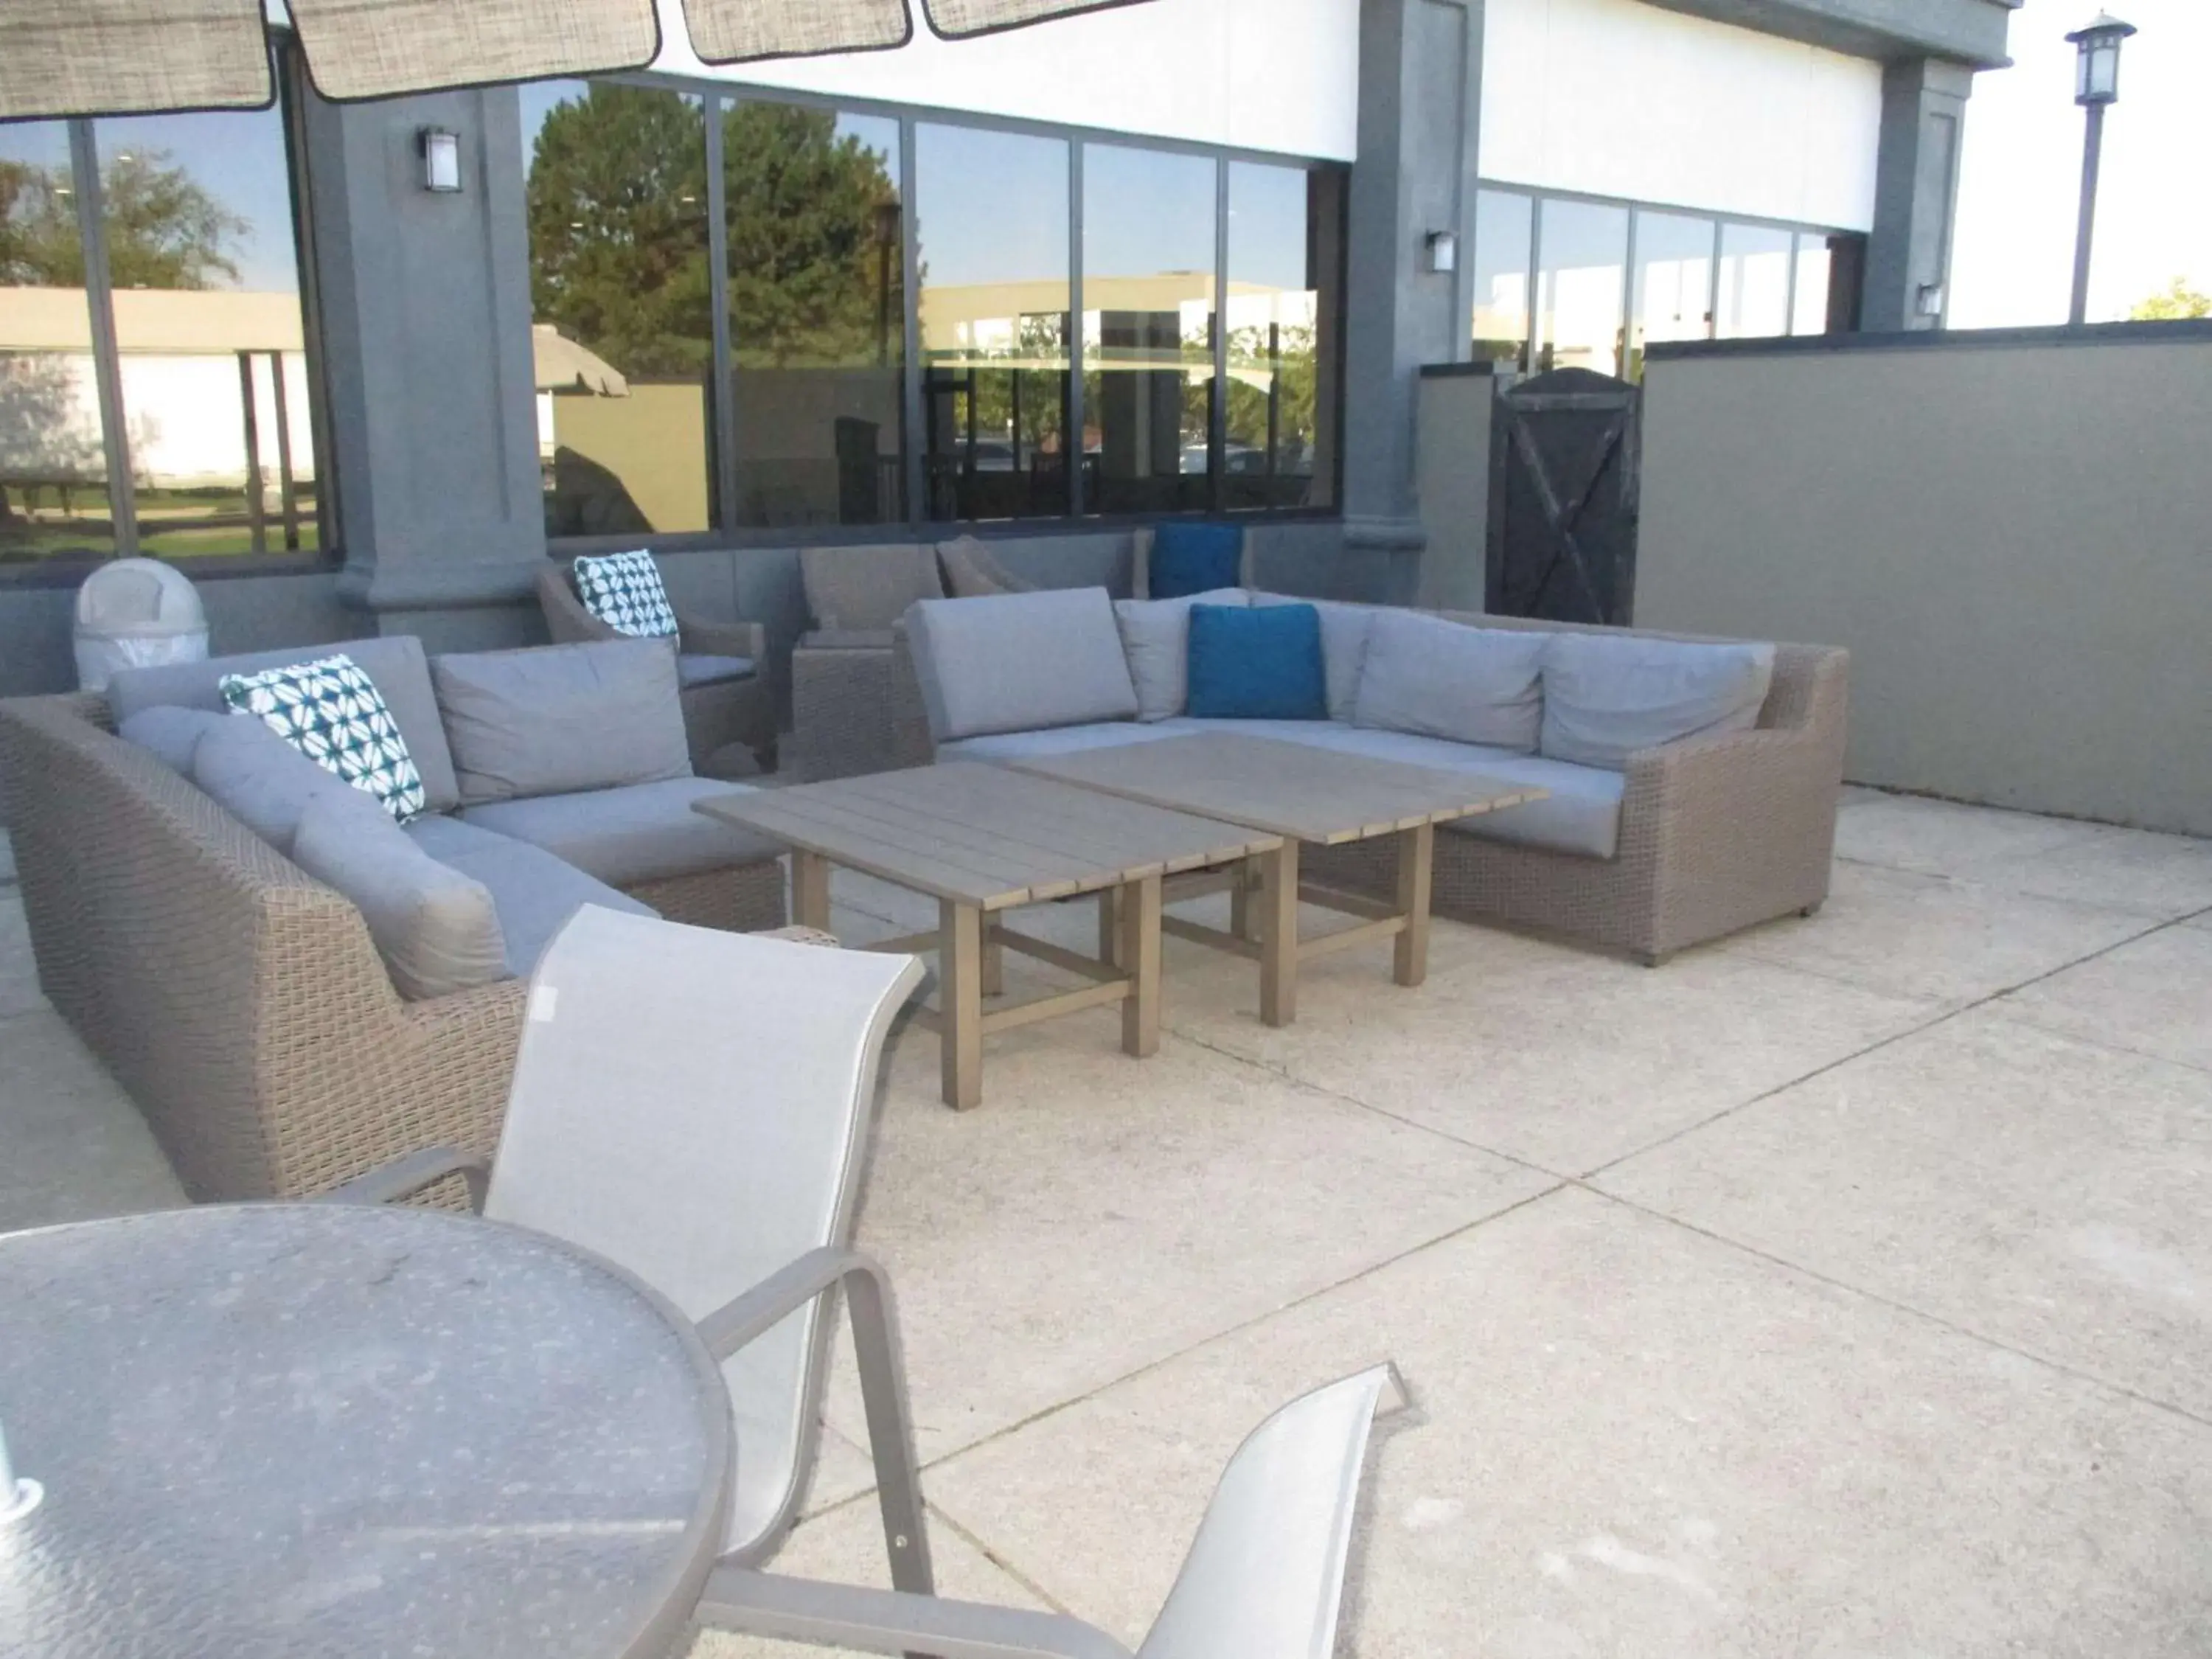 Property building, Seating Area in Best Western Plus Indianapolis NW Hotel